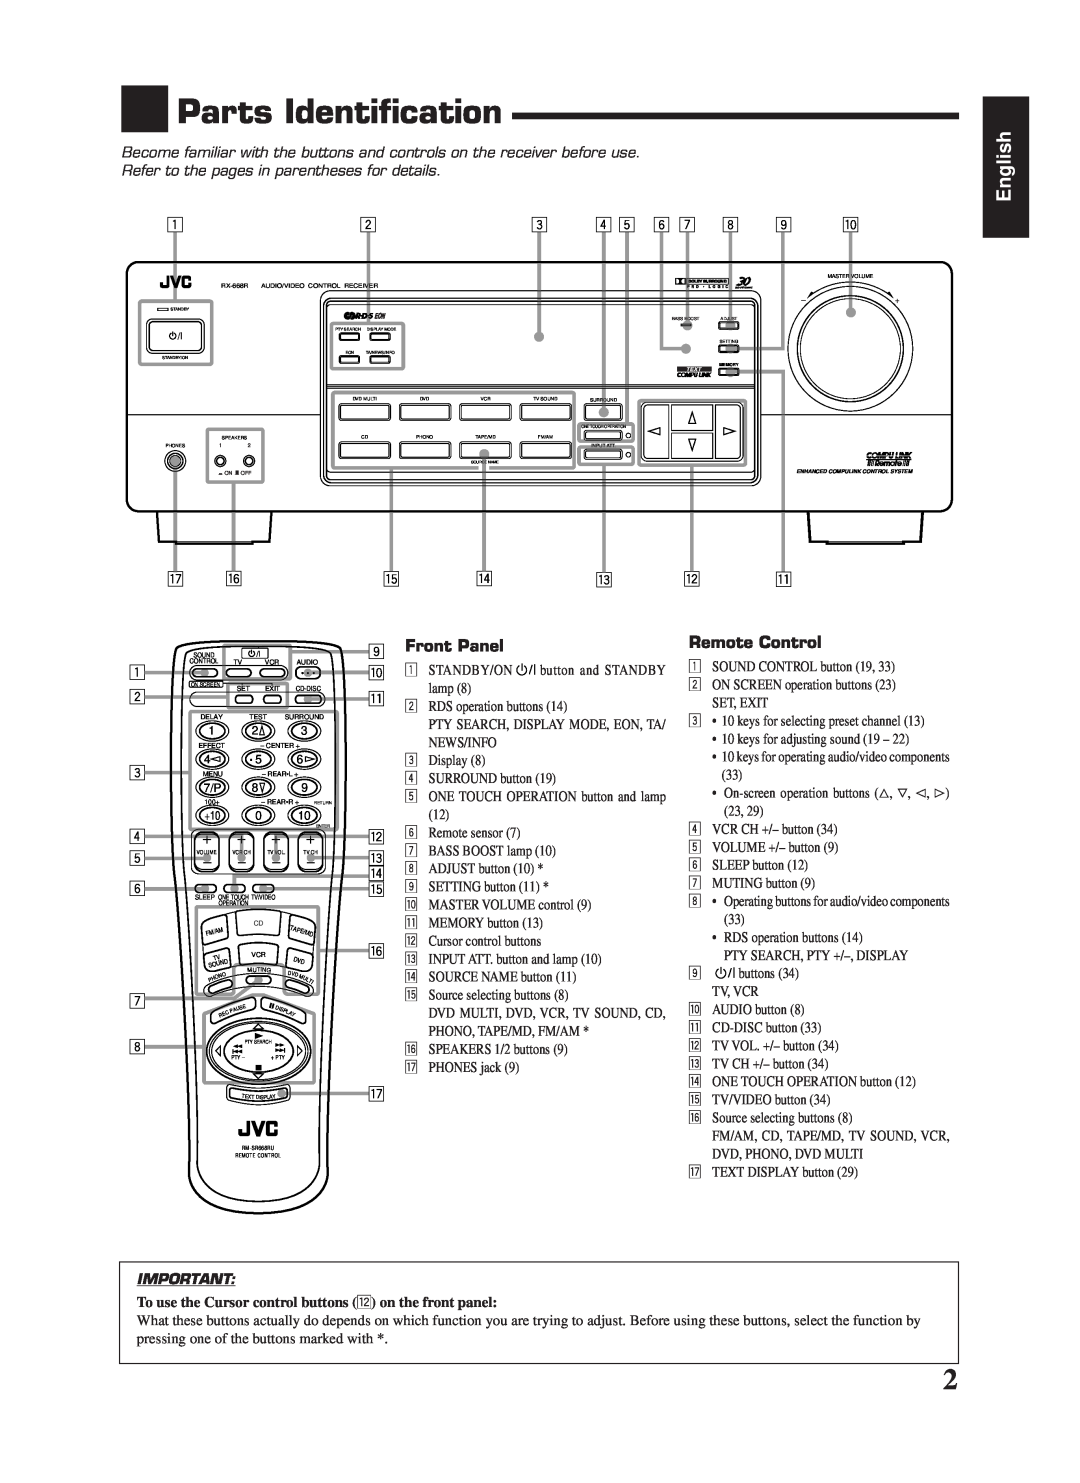 JVC RX-668RBK manual Parts Identification, English, 9Front Panel, Remote Control 